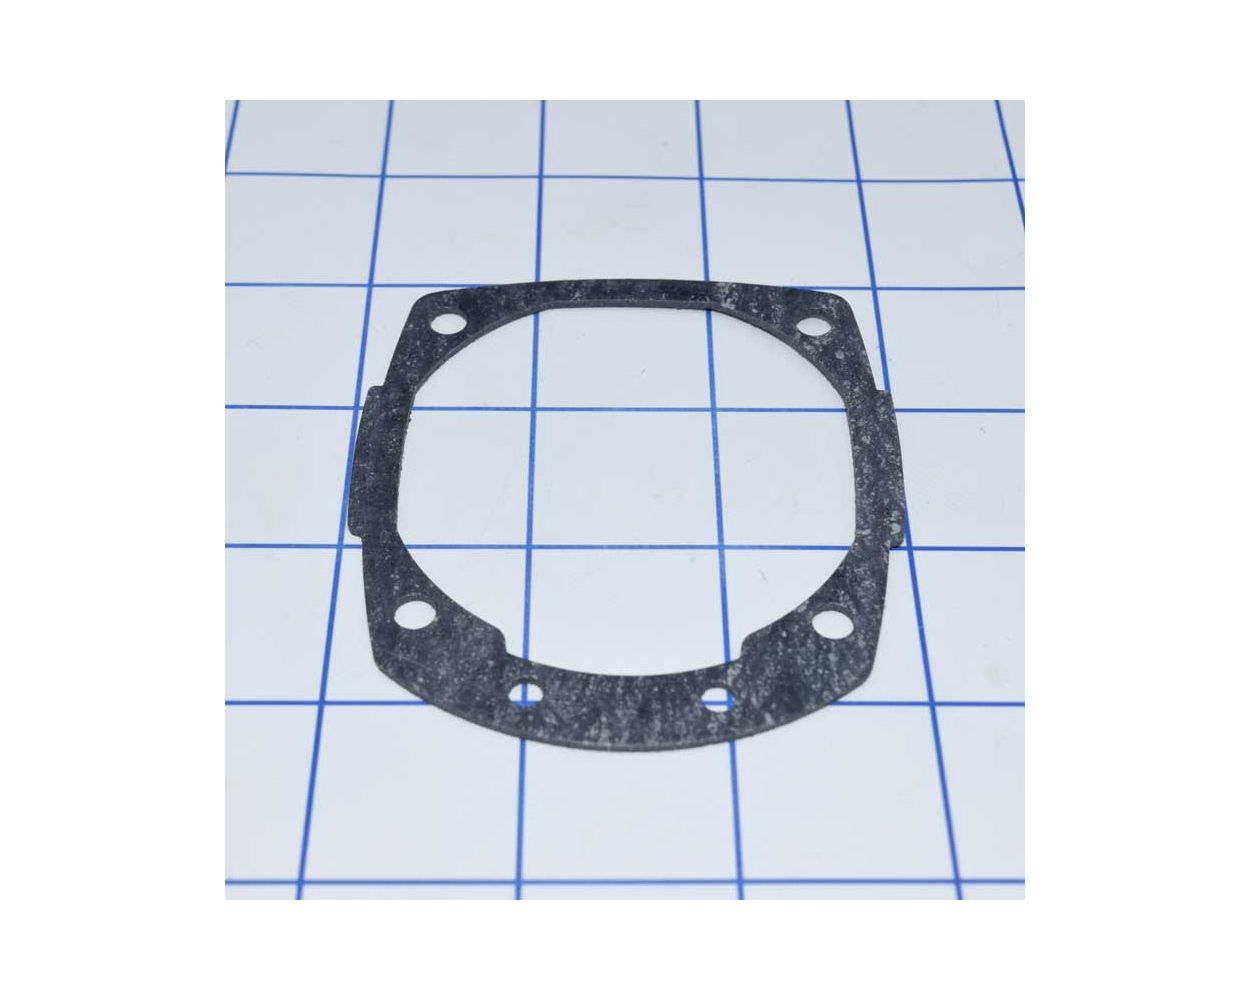 PORTER CABLE 886114 GASKET FOR NAILER 